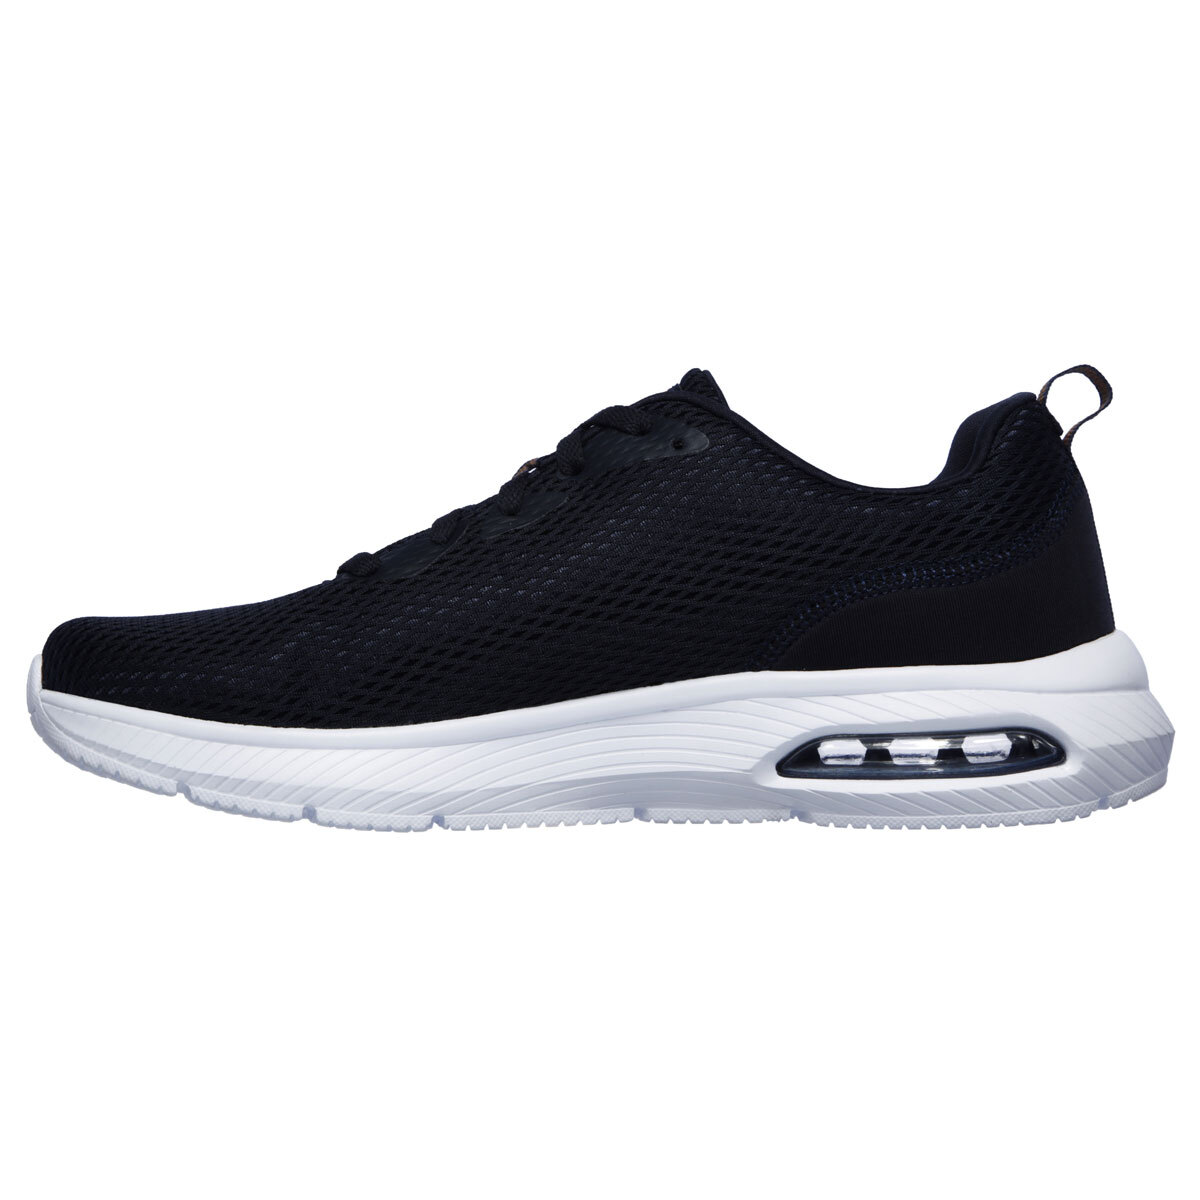 Skechers Dyna Air Men's Shoes in Navy